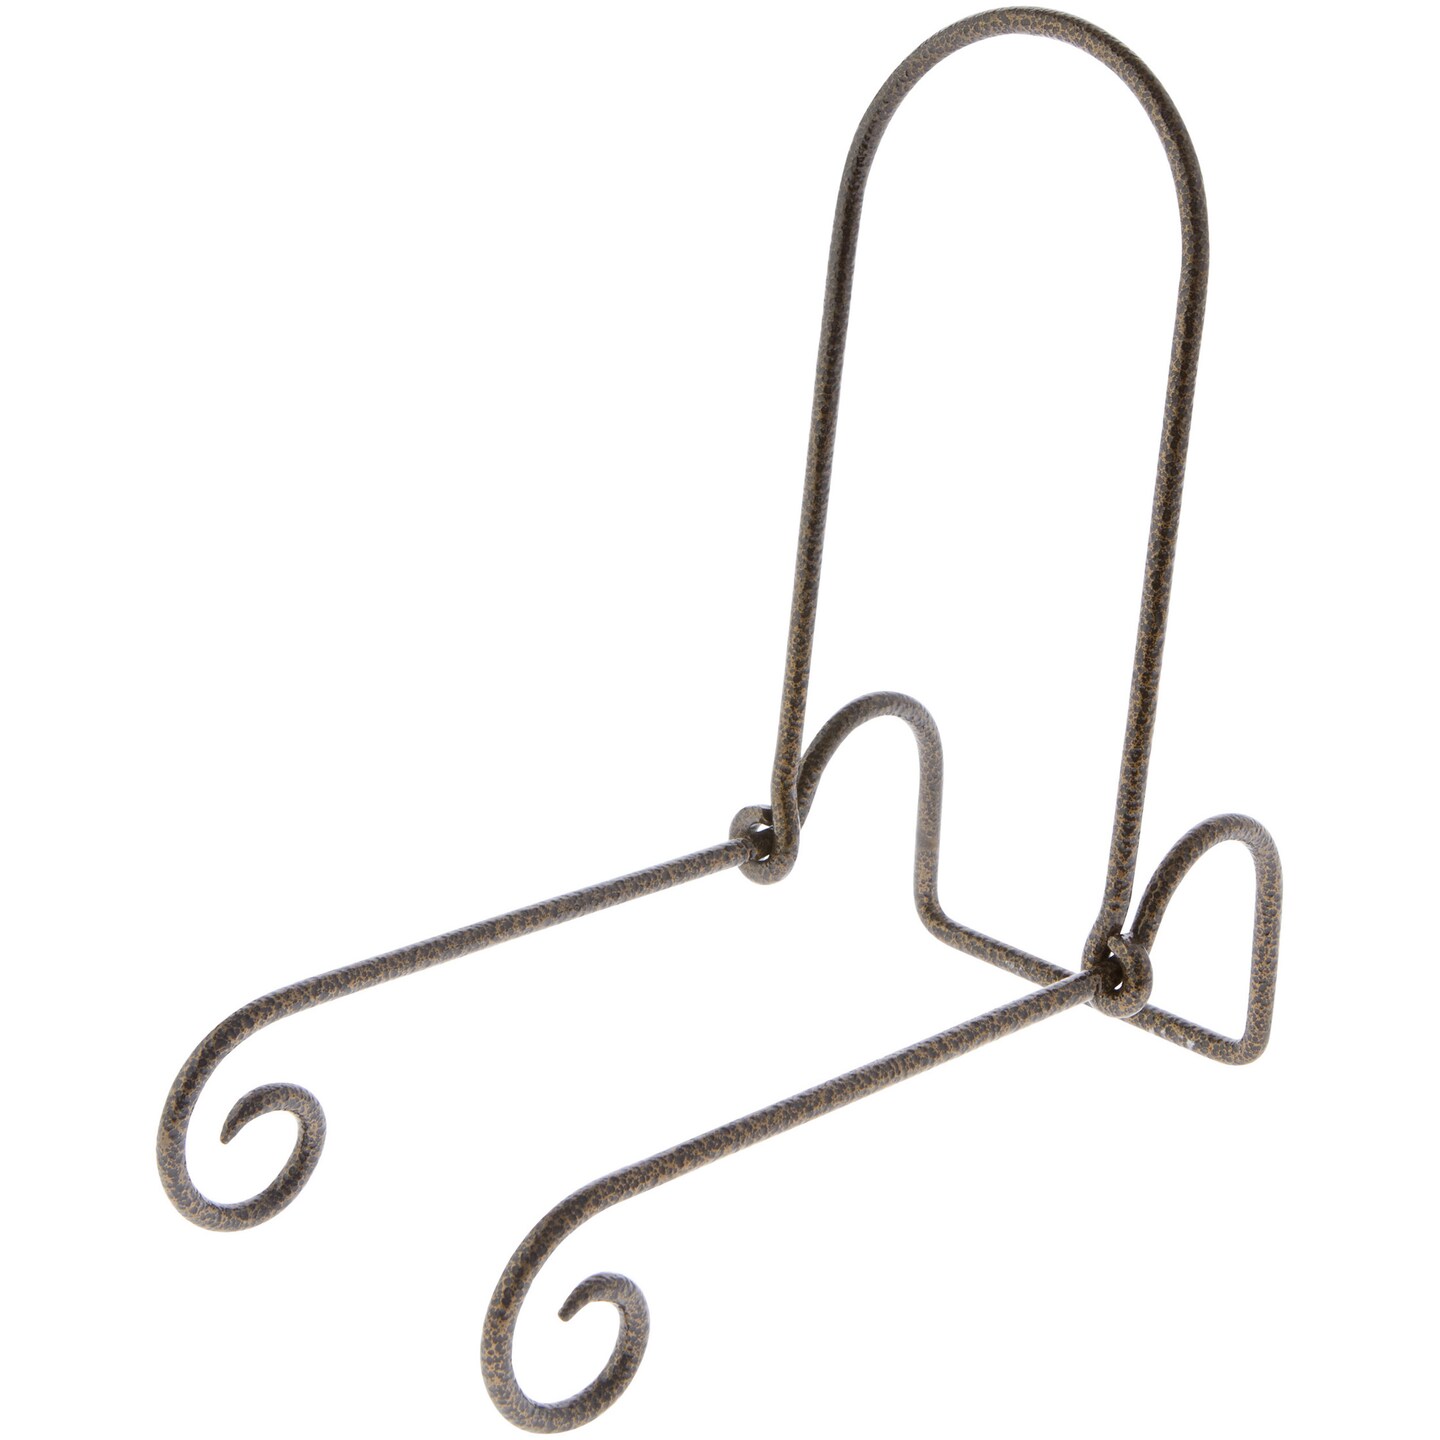 Bard&#x27;s Adjustable Gold Wrought Iron Bowl or Deep Platter Stand, 10&#x22; H x 5&#x22; W x 8.75&#x22; D